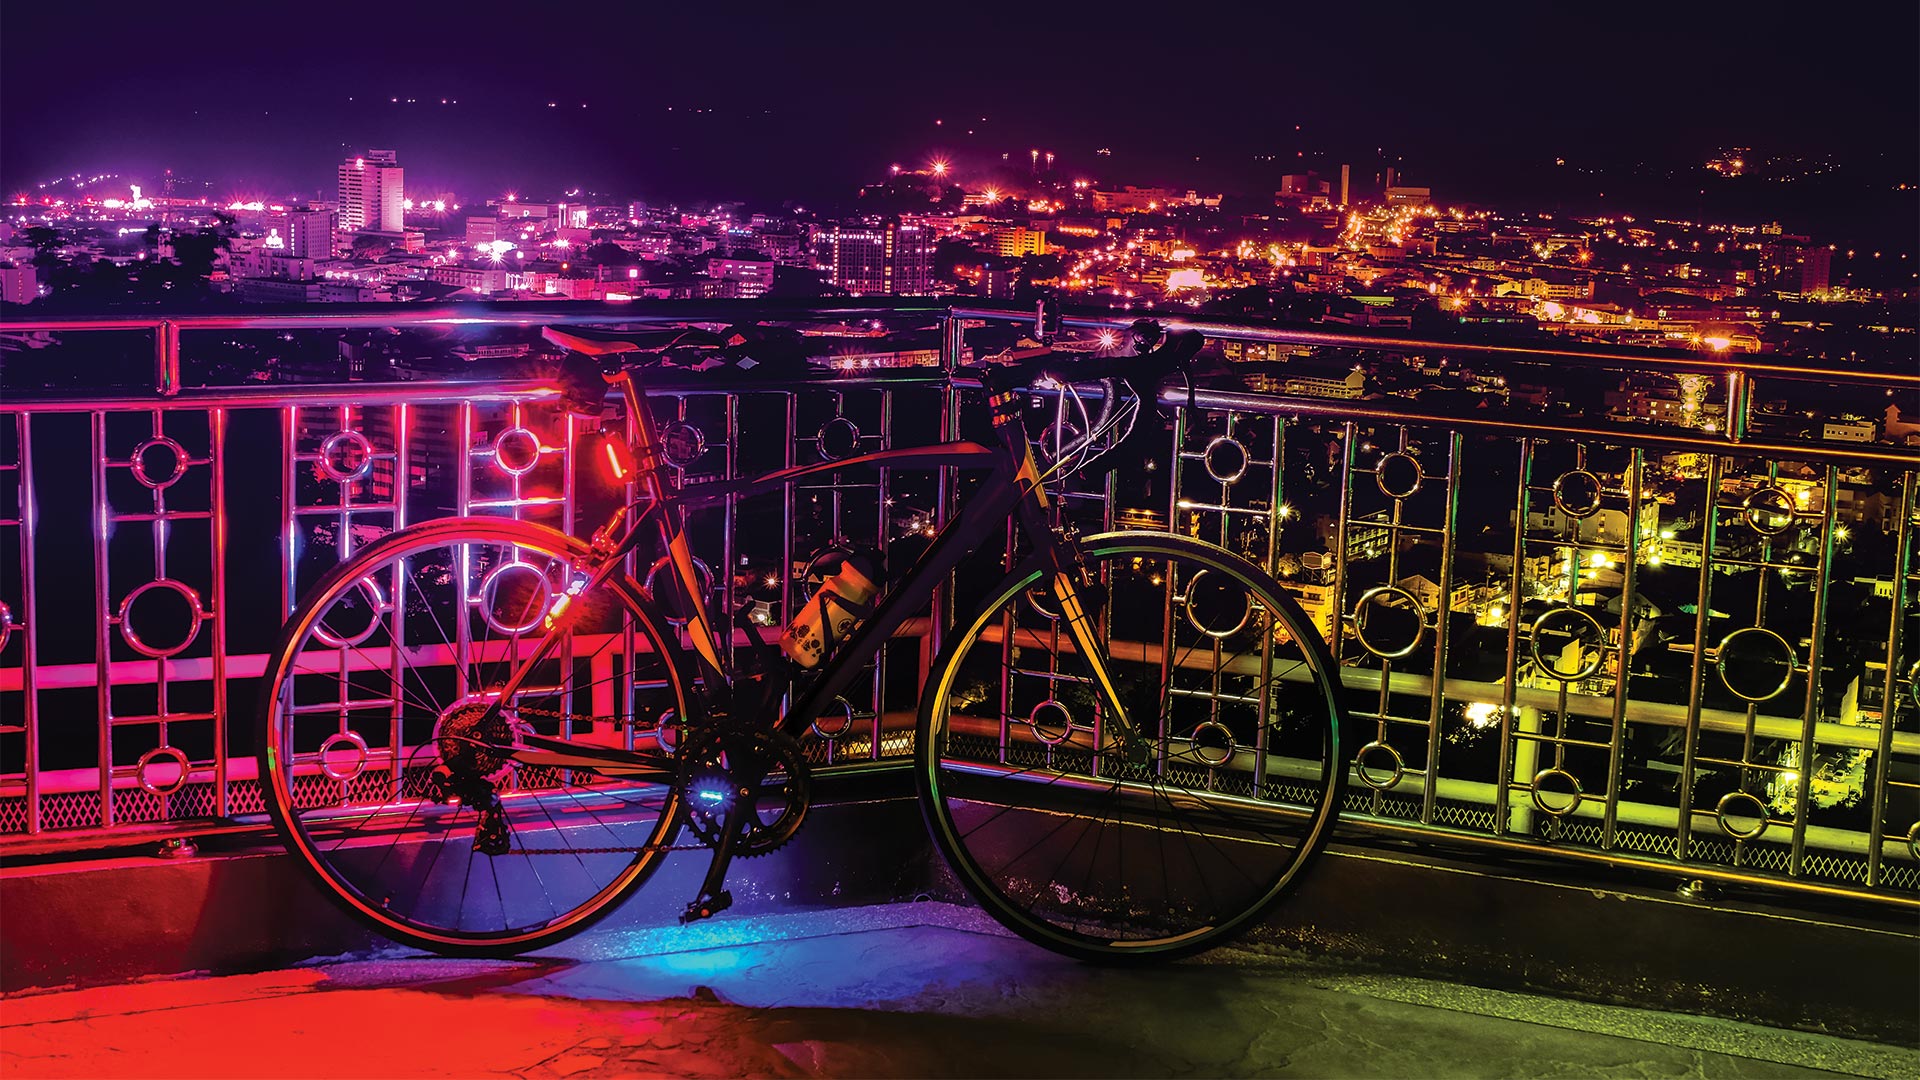 Colour night with bicycle against a fence